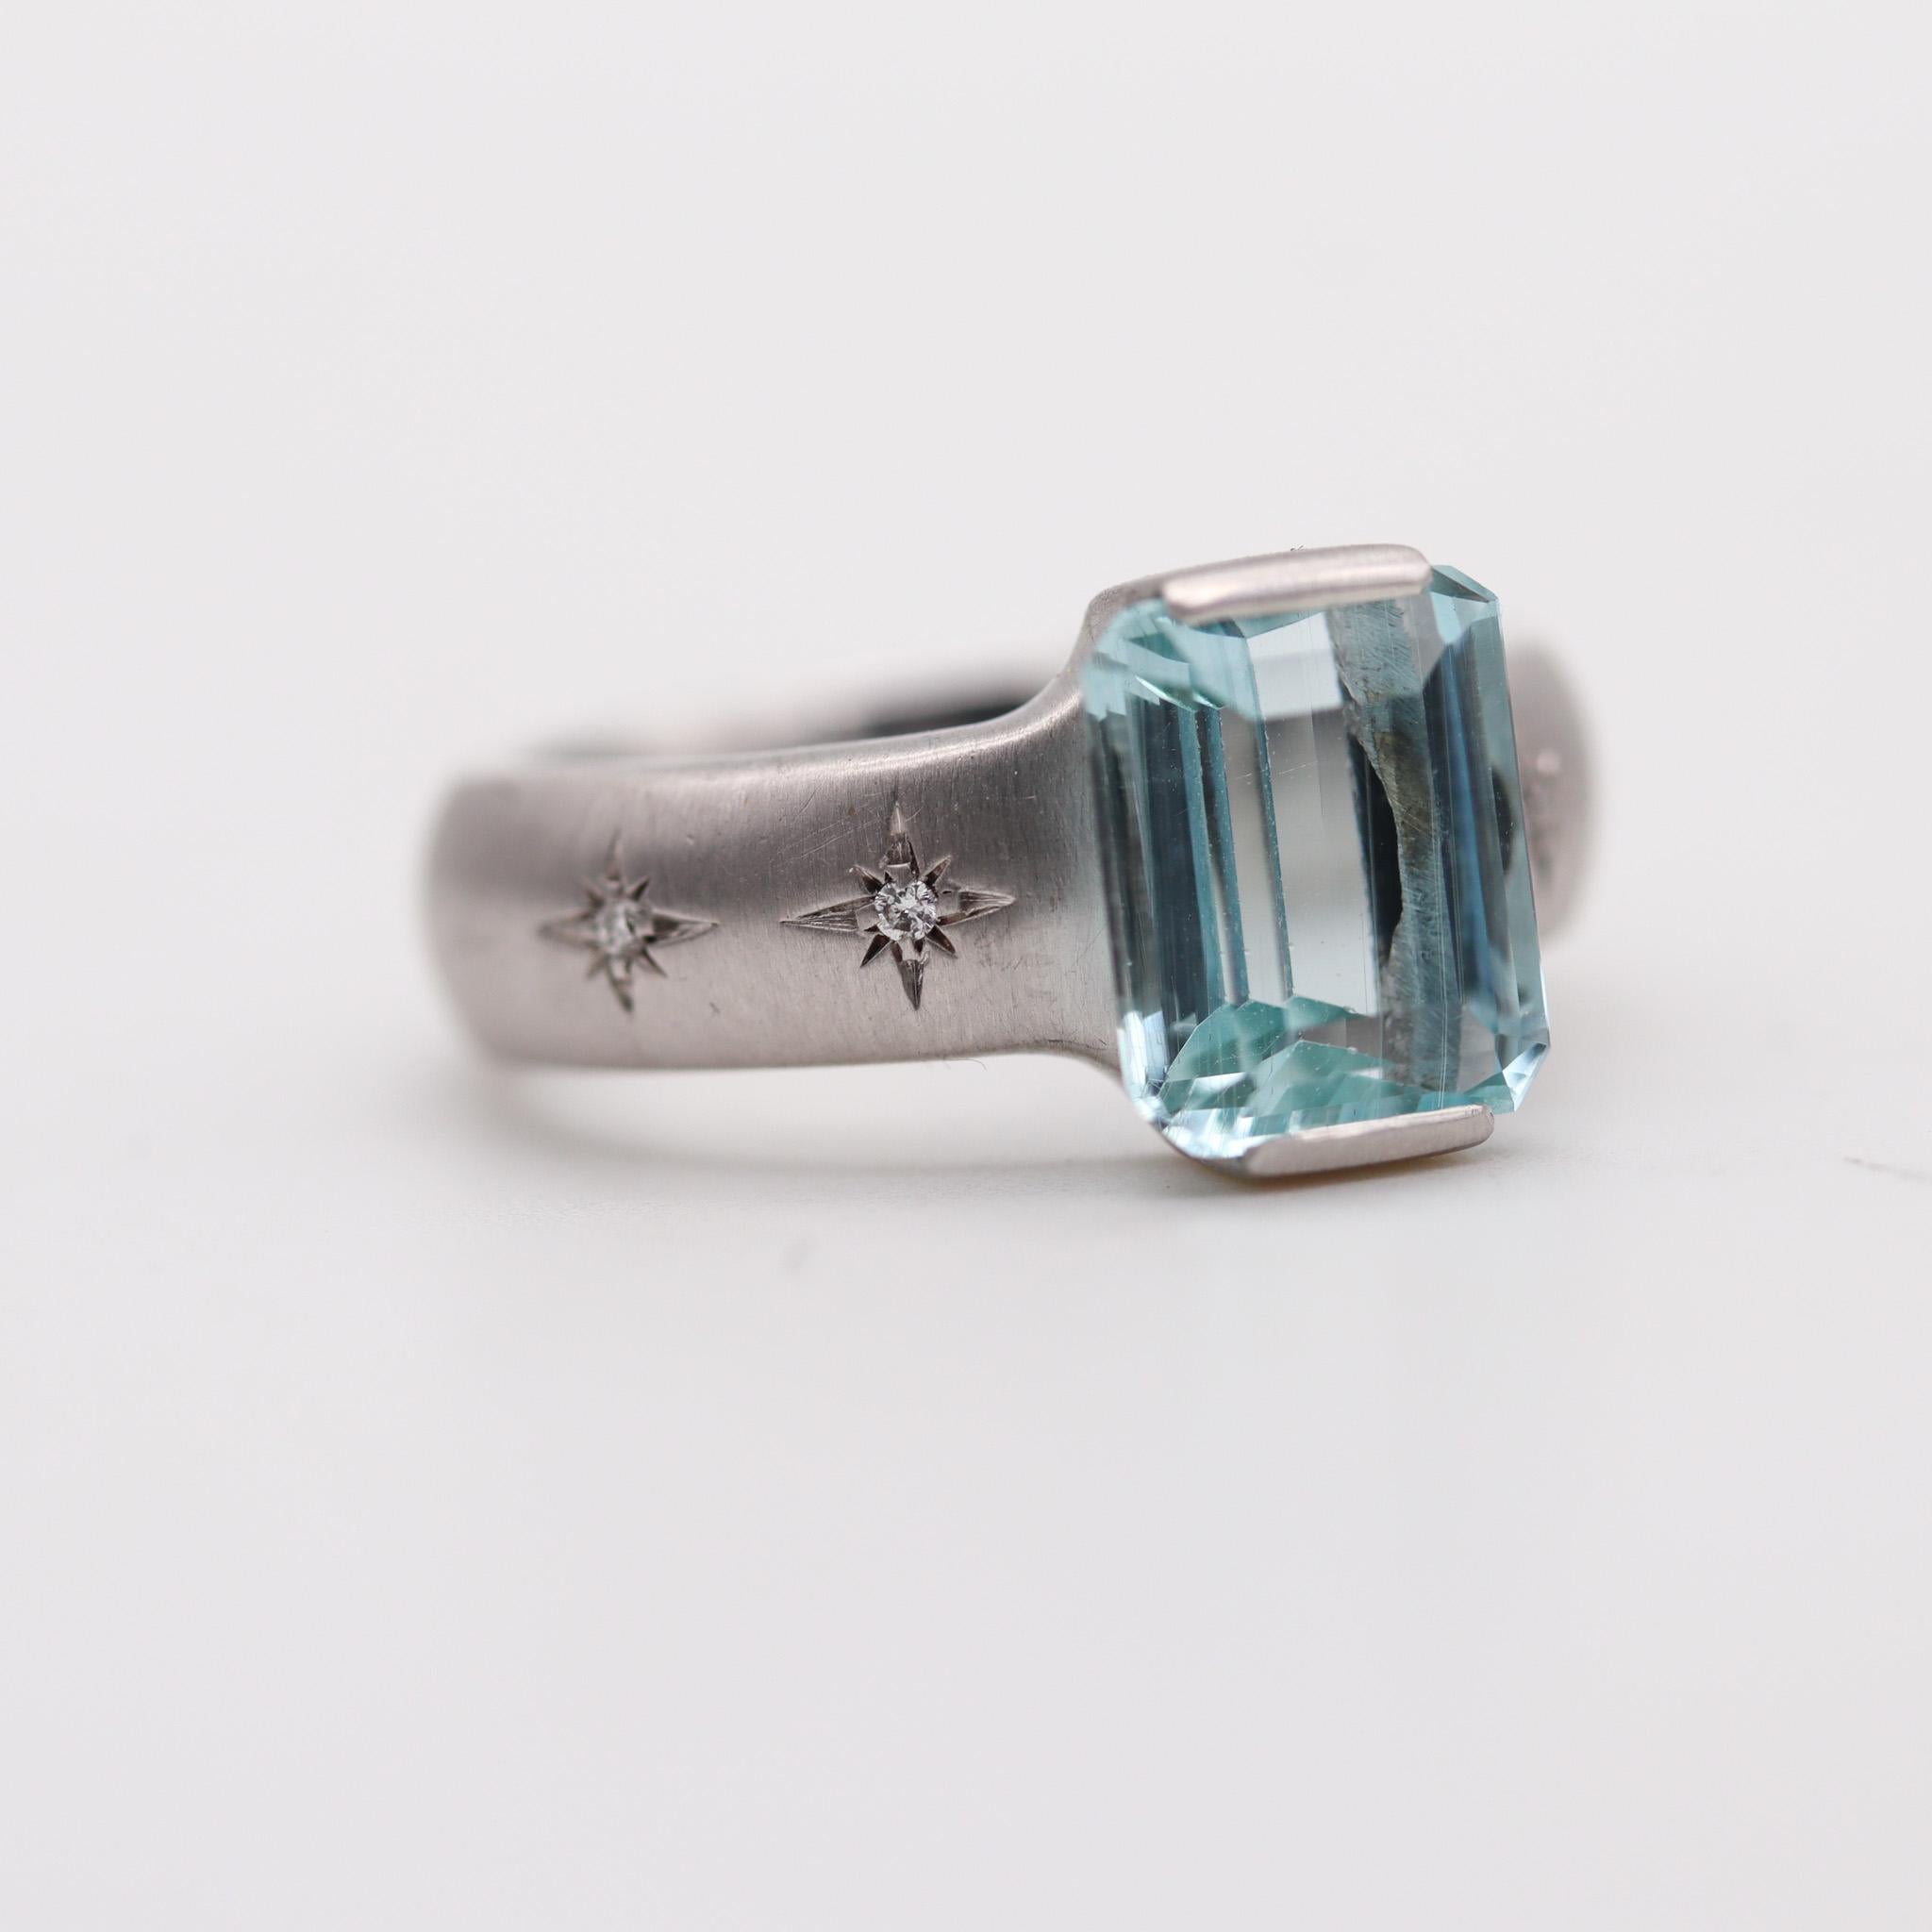 Aquamarine ring designed by H. Stern.

Beautiful cocktail ring, created by the Brazilian jewelry house of Hans Stern. This classic ring was carefully crafted in solid white gold of 18 karats with frosted-brushed finish and embellished with a great